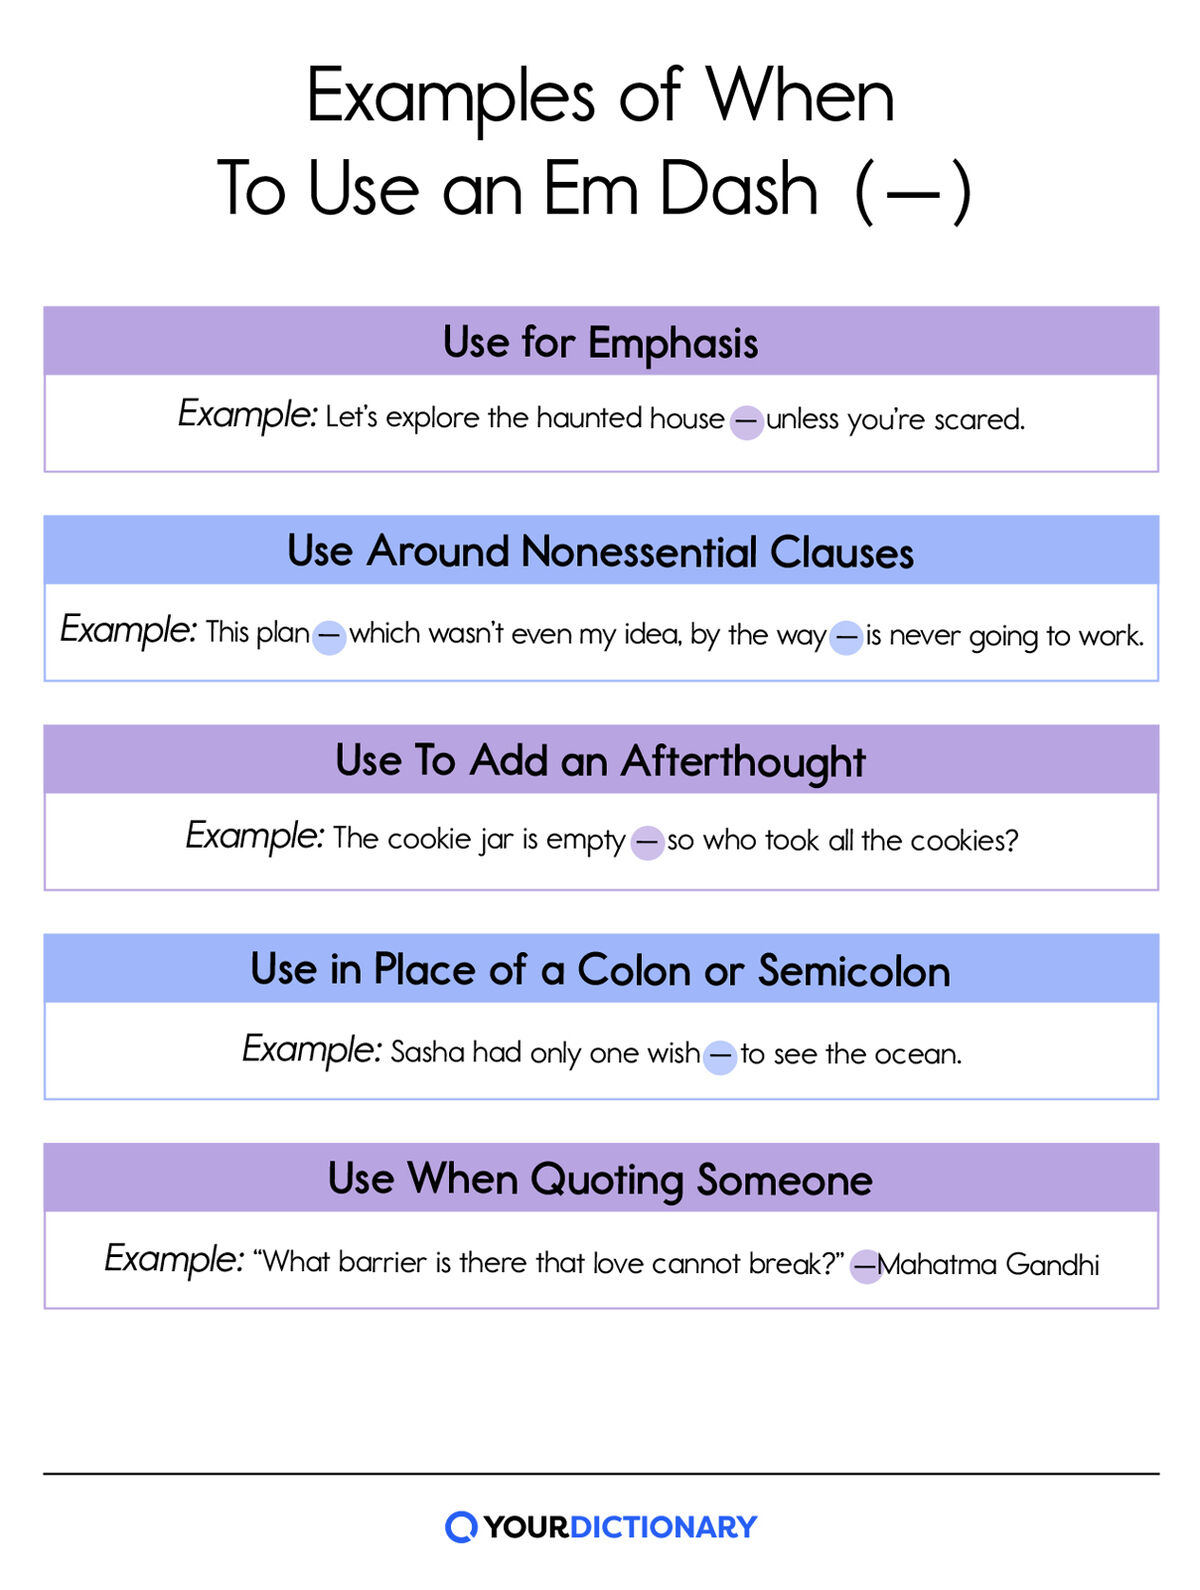 Chart showing when to use an em dash, including all the rules outlined below in article.